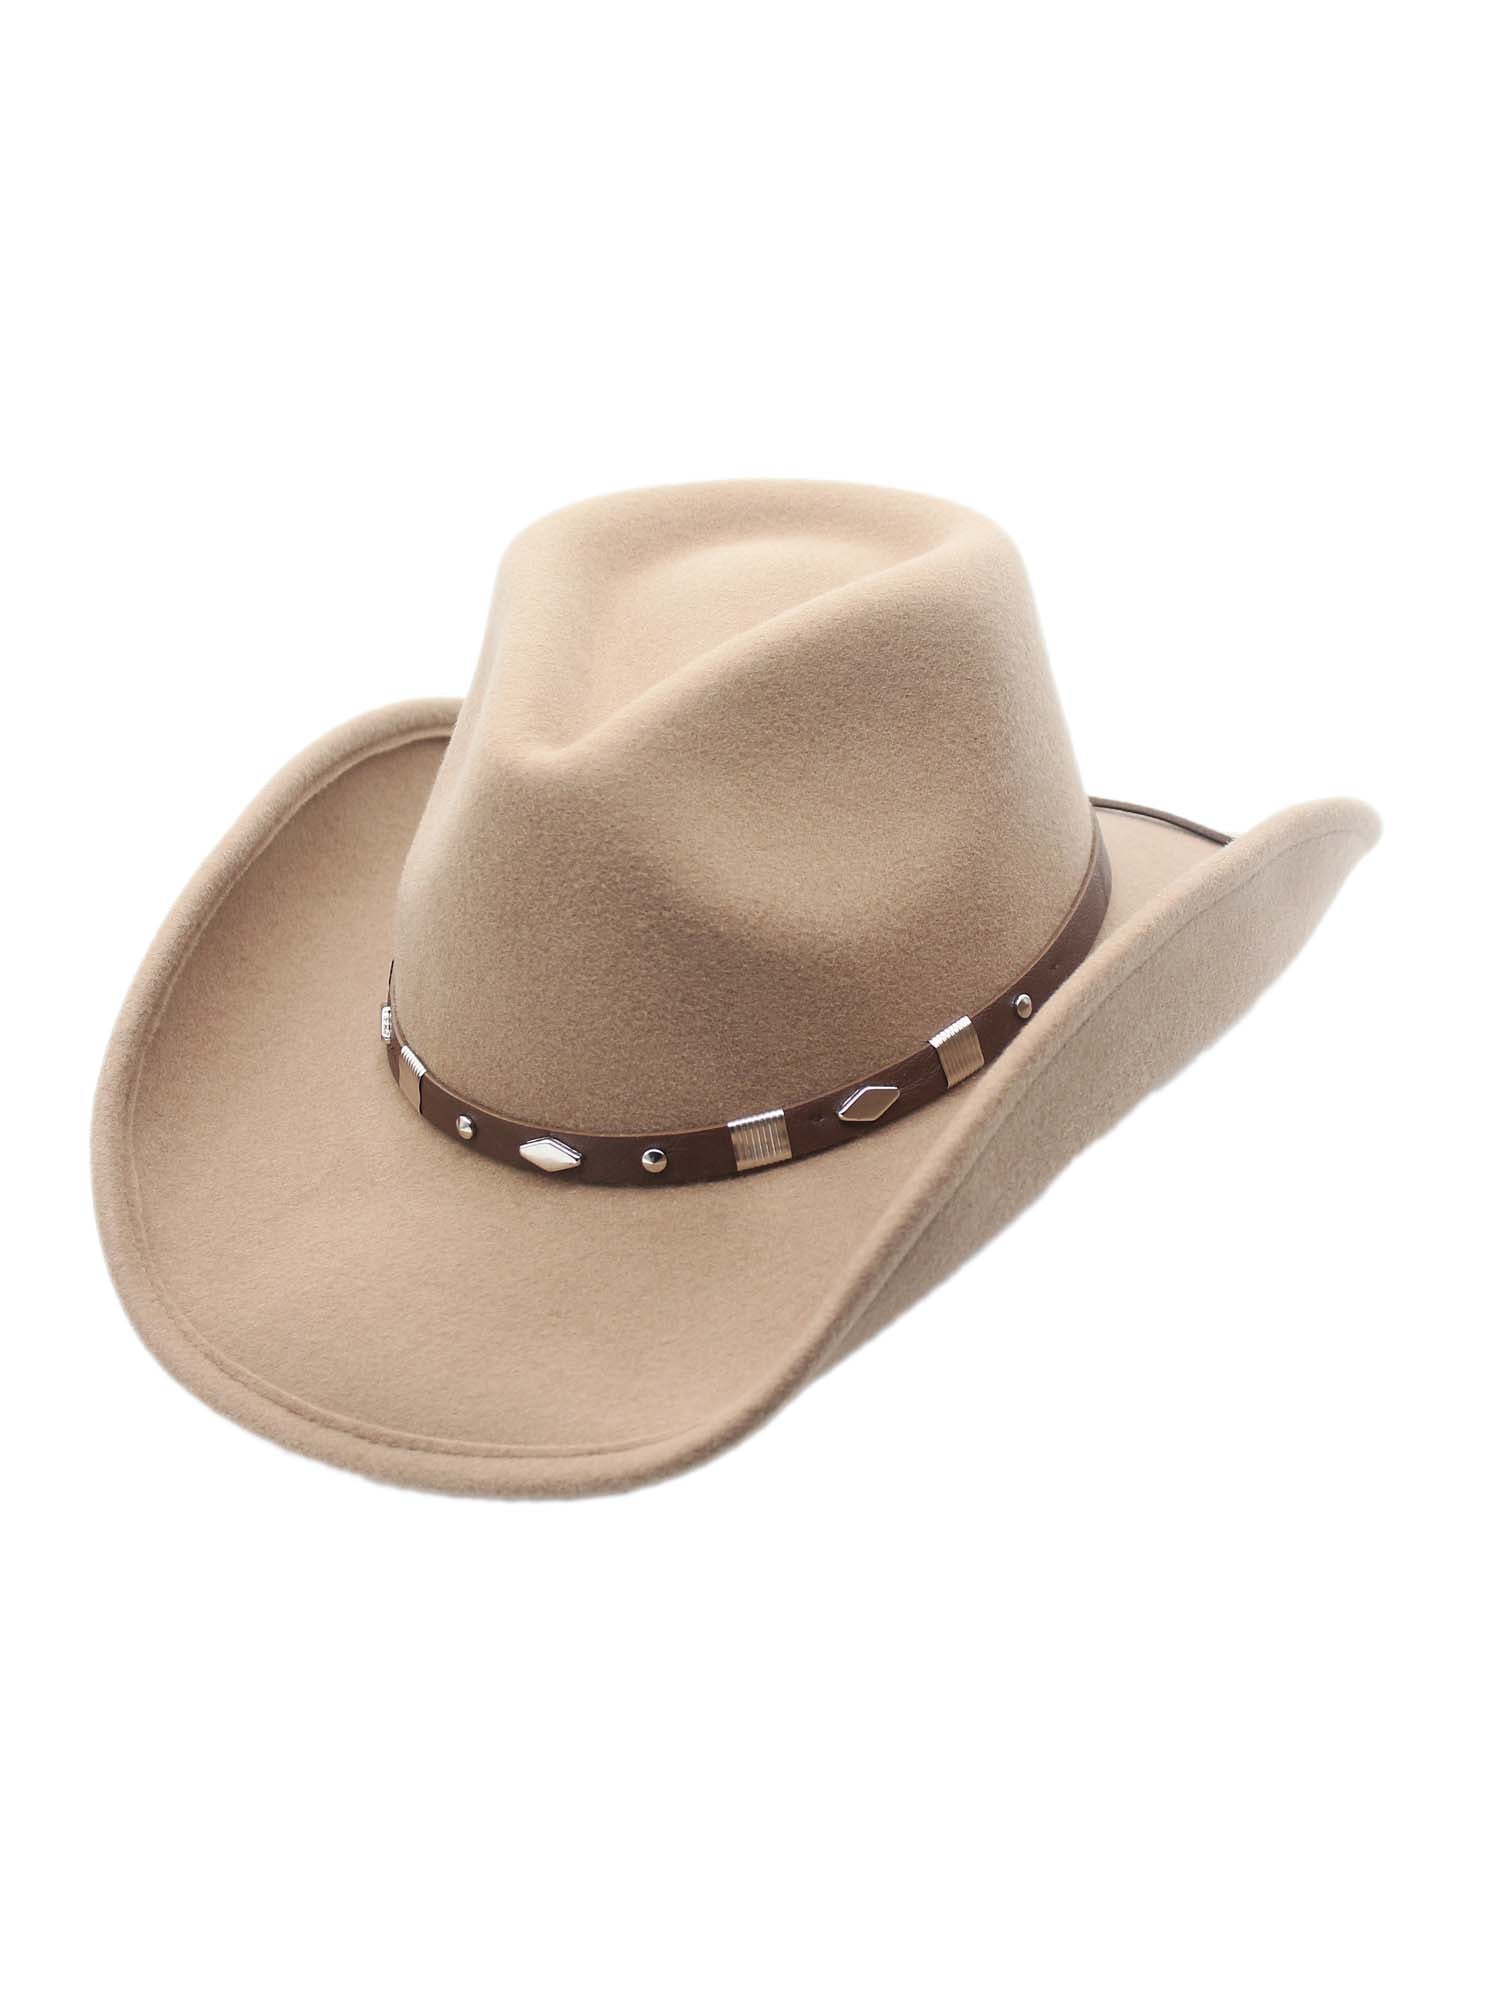 Winslow Shapeable Wool Felt Outback Western Style Cowboy Hat by Silver Canyon